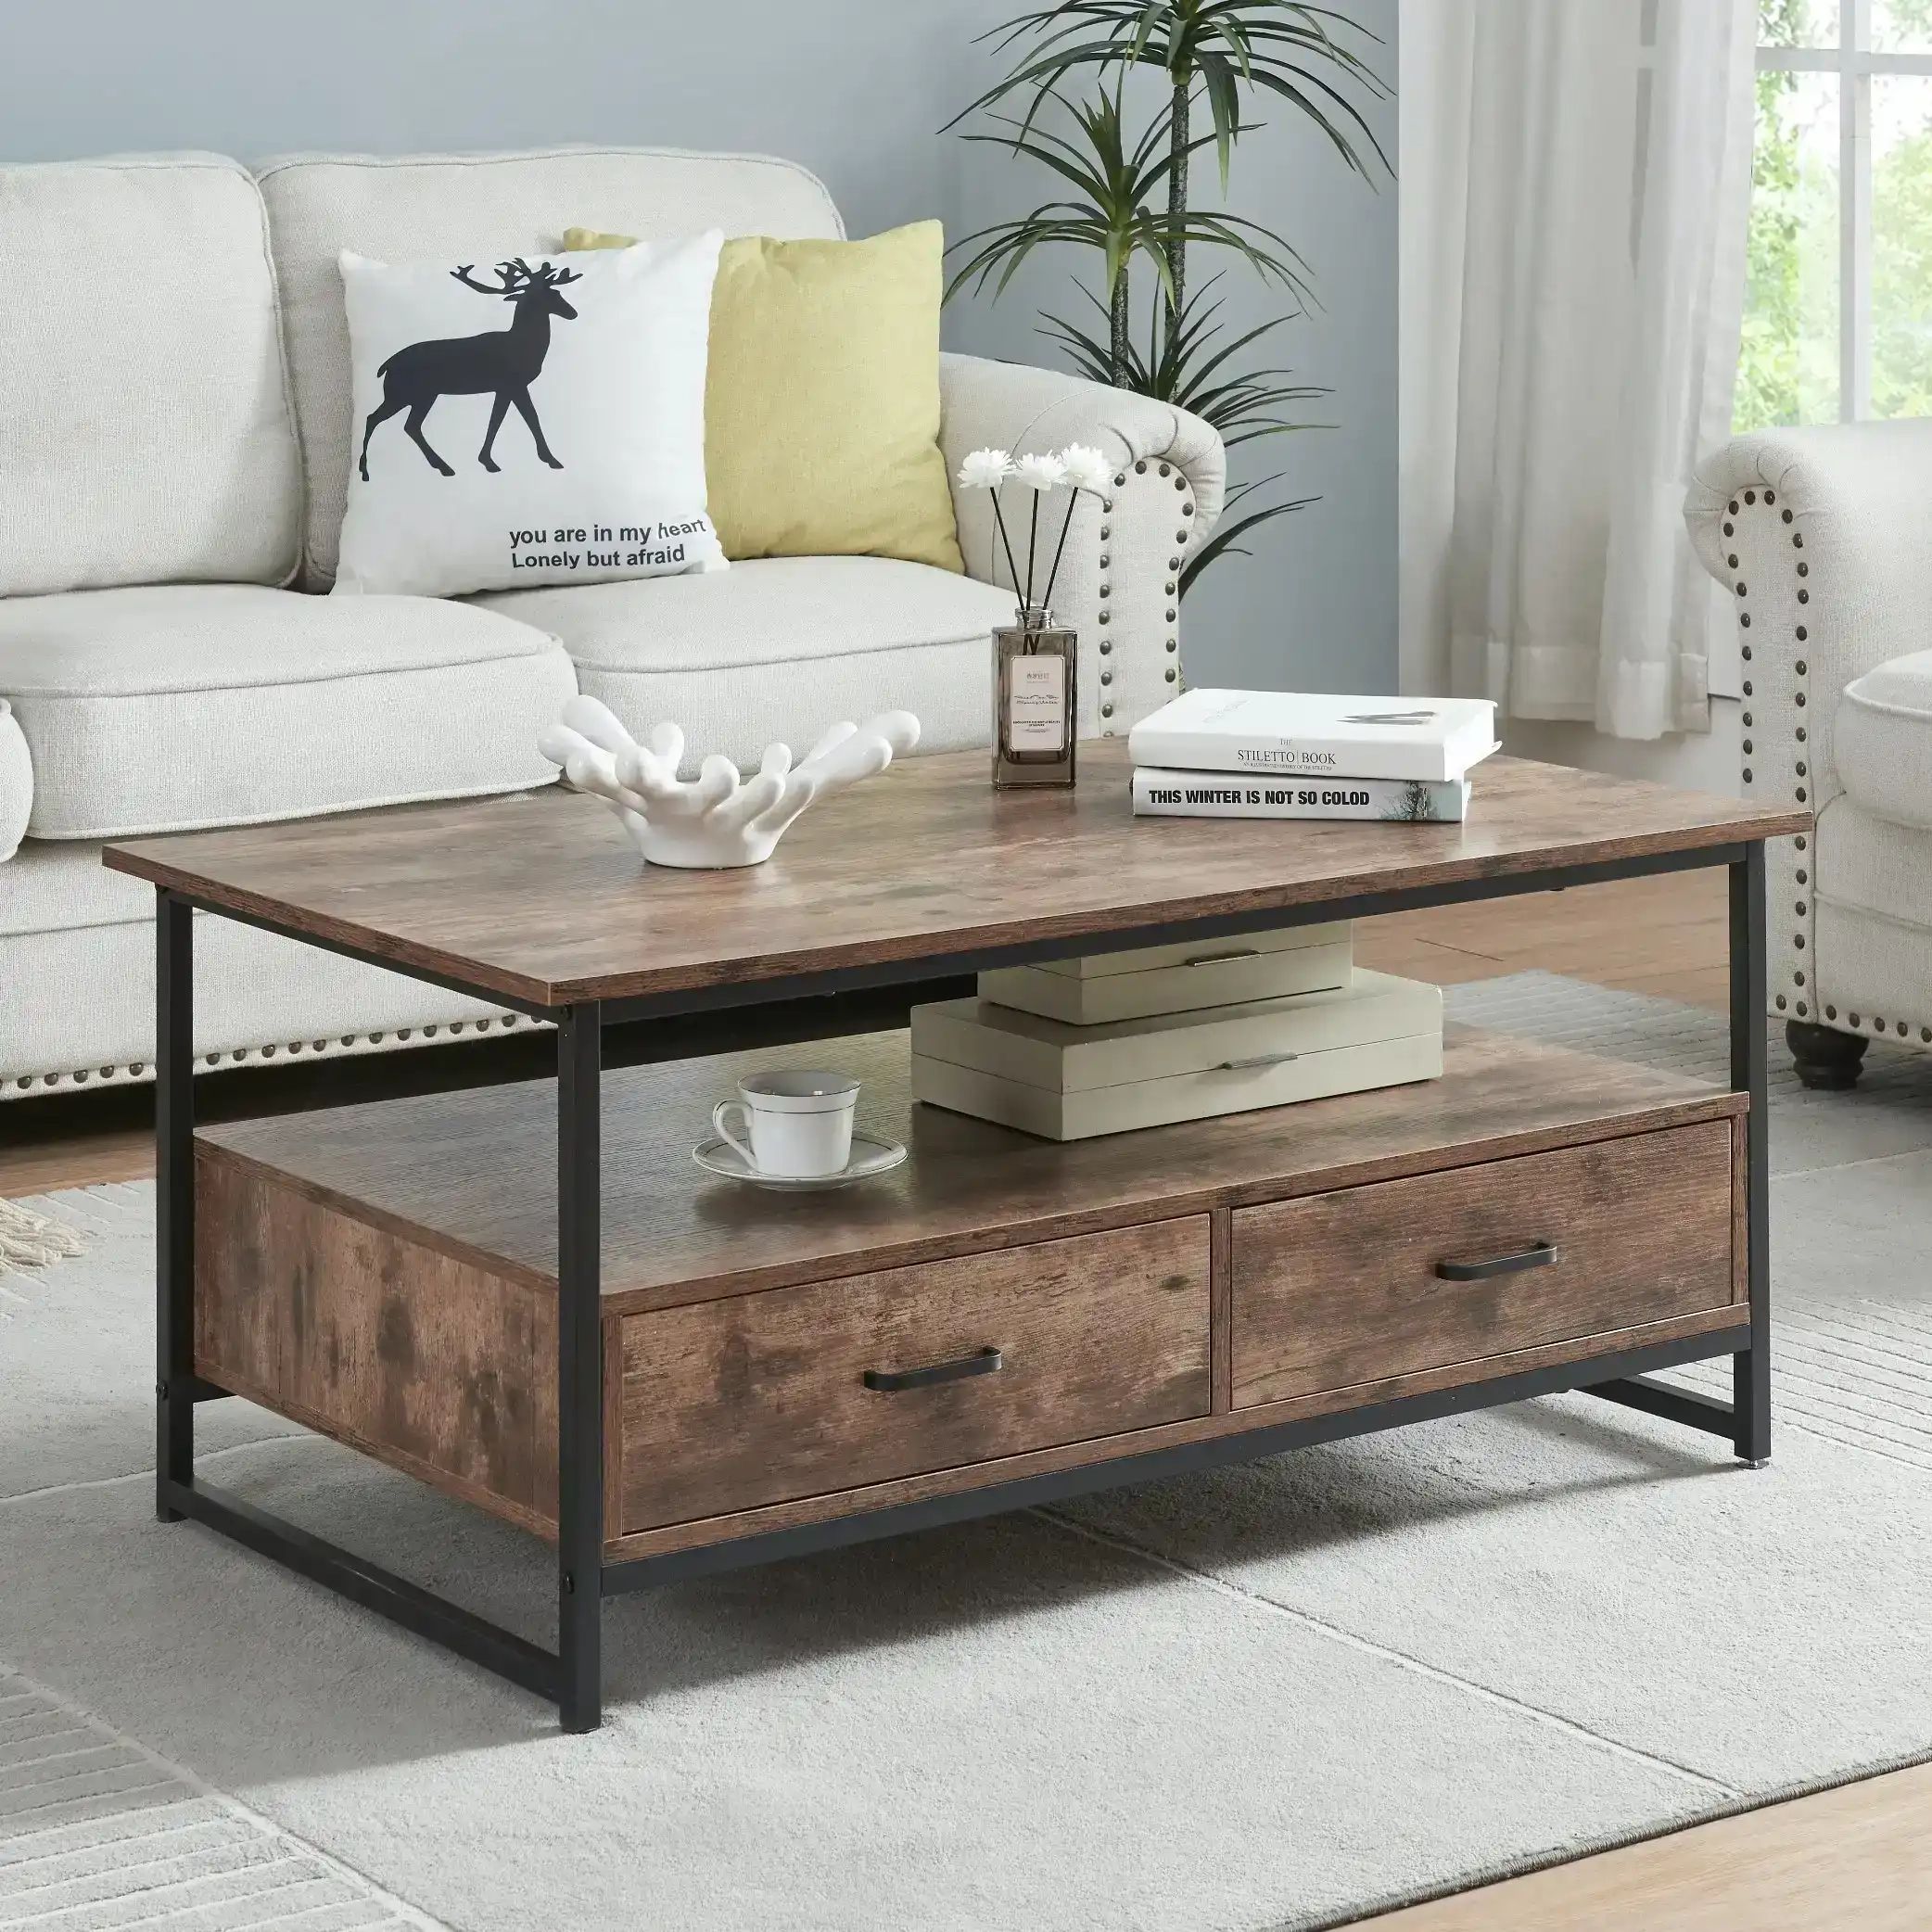 Hliving Rectangular Farmhouse Coffee Table With Open Storage Shelves And 2  Drawers,Rustic Brown | C&P Decoway | Lasoo With Coffee Tables With Open Storage Shelves (View 3 of 15)